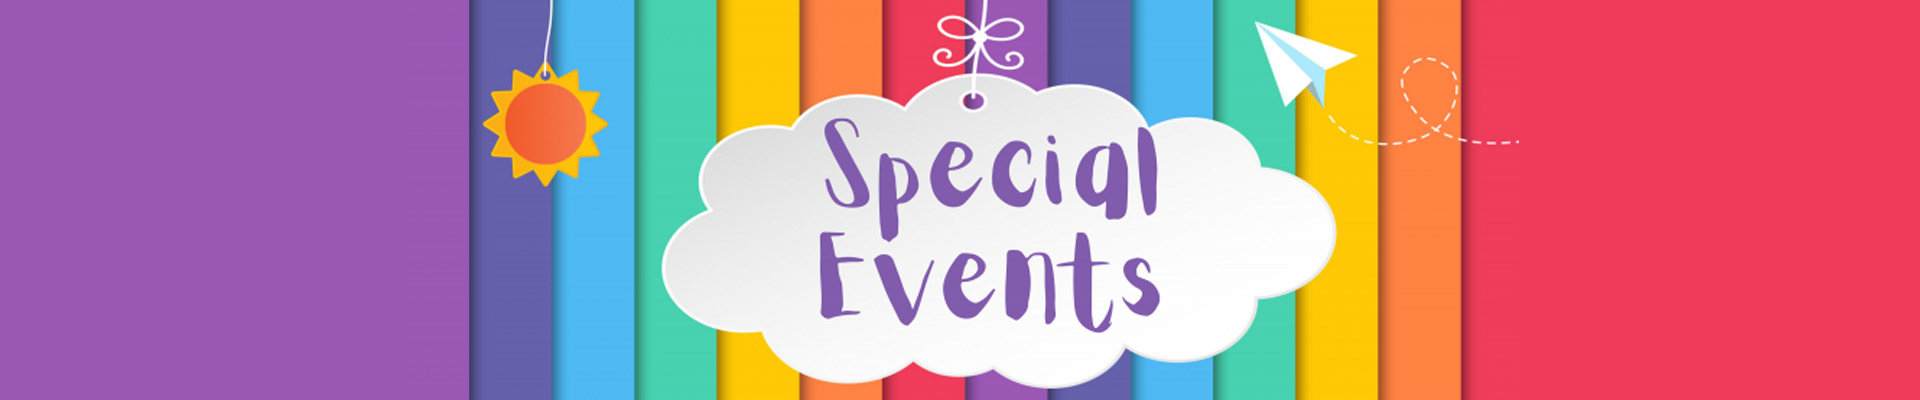 Our Special Events